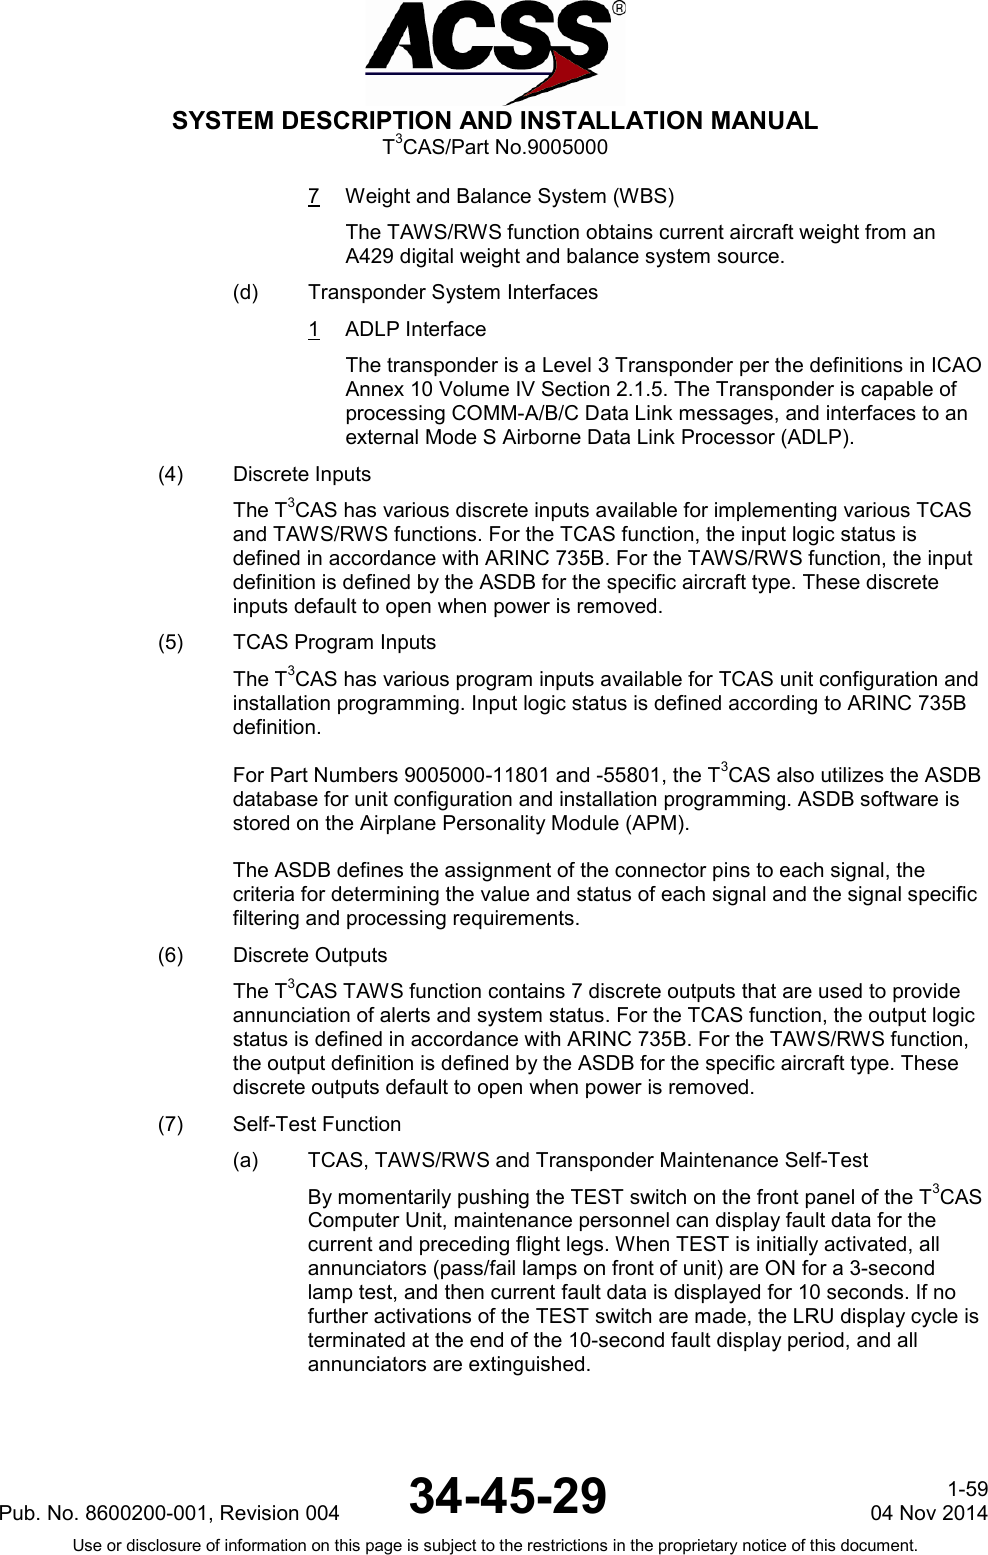  SYSTEM DESCRIPTION AND INSTALLATION MANUAL T3CAS/Part No.9005000 7  Weight and Balance System (WBS) The TAWS/RWS function obtains current aircraft weight from an A429 digital weight and balance system source. (d) Transponder System Interfaces 1  ADLP Interface The transponder is a Level 3 Transponder per the definitions in ICAO Annex 10 Volume IV Section 2.1.5. The Transponder is capable of processing COMM-A/B/C Data Link messages, and interfaces to an external Mode S Airborne Data Link Processor (ADLP). (4) Discrete Inputs The T3CAS has various discrete inputs available for implementing various TCAS and TAWS/RWS functions. For the TCAS function, the input logic status is defined in accordance with ARINC 735B. For the TAWS/RWS function, the input definition is defined by the ASDB for the specific aircraft type. These discrete inputs default to open when power is removed. (5) TCAS Program Inputs The T3CAS has various program inputs available for TCAS unit configuration and installation programming. Input logic status is defined according to ARINC 735B definition.  For Part Numbers 9005000-11801 and -55801, the T3CAS also utilizes the ASDB database for unit configuration and installation programming. ASDB software is stored on the Airplane Personality Module (APM).  The ASDB defines the assignment of the connector pins to each signal, the criteria for determining the value and status of each signal and the signal specific filtering and processing requirements. (6) Discrete Outputs The T3CAS TAWS function contains 7 discrete outputs that are used to provide annunciation of alerts and system status. For the TCAS function, the output logic status is defined in accordance with ARINC 735B. For the TAWS/RWS function, the output definition is defined by the ASDB for the specific aircraft type. These discrete outputs default to open when power is removed. (7) Self-Test Function (a) TCAS, TAWS/RWS and Transponder Maintenance Self-Test By momentarily pushing the TEST switch on the front panel of the T3CAS Computer Unit, maintenance personnel can display fault data for the current and preceding flight legs. When TEST is initially activated, all annunciators (pass/fail lamps on front of unit) are ON for a 3-second lamp test, and then current fault data is displayed for 10 seconds. If no further activations of the TEST switch are made, the LRU display cycle is terminated at the end of the 10-second fault display period, and all annunciators are extinguished.  Pub. No. 8600200-001, Revision 004 34-45-29 1-59 04 Nov 2014 Use or disclosure of information on this page is subject to the restrictions in the proprietary notice of this document.  